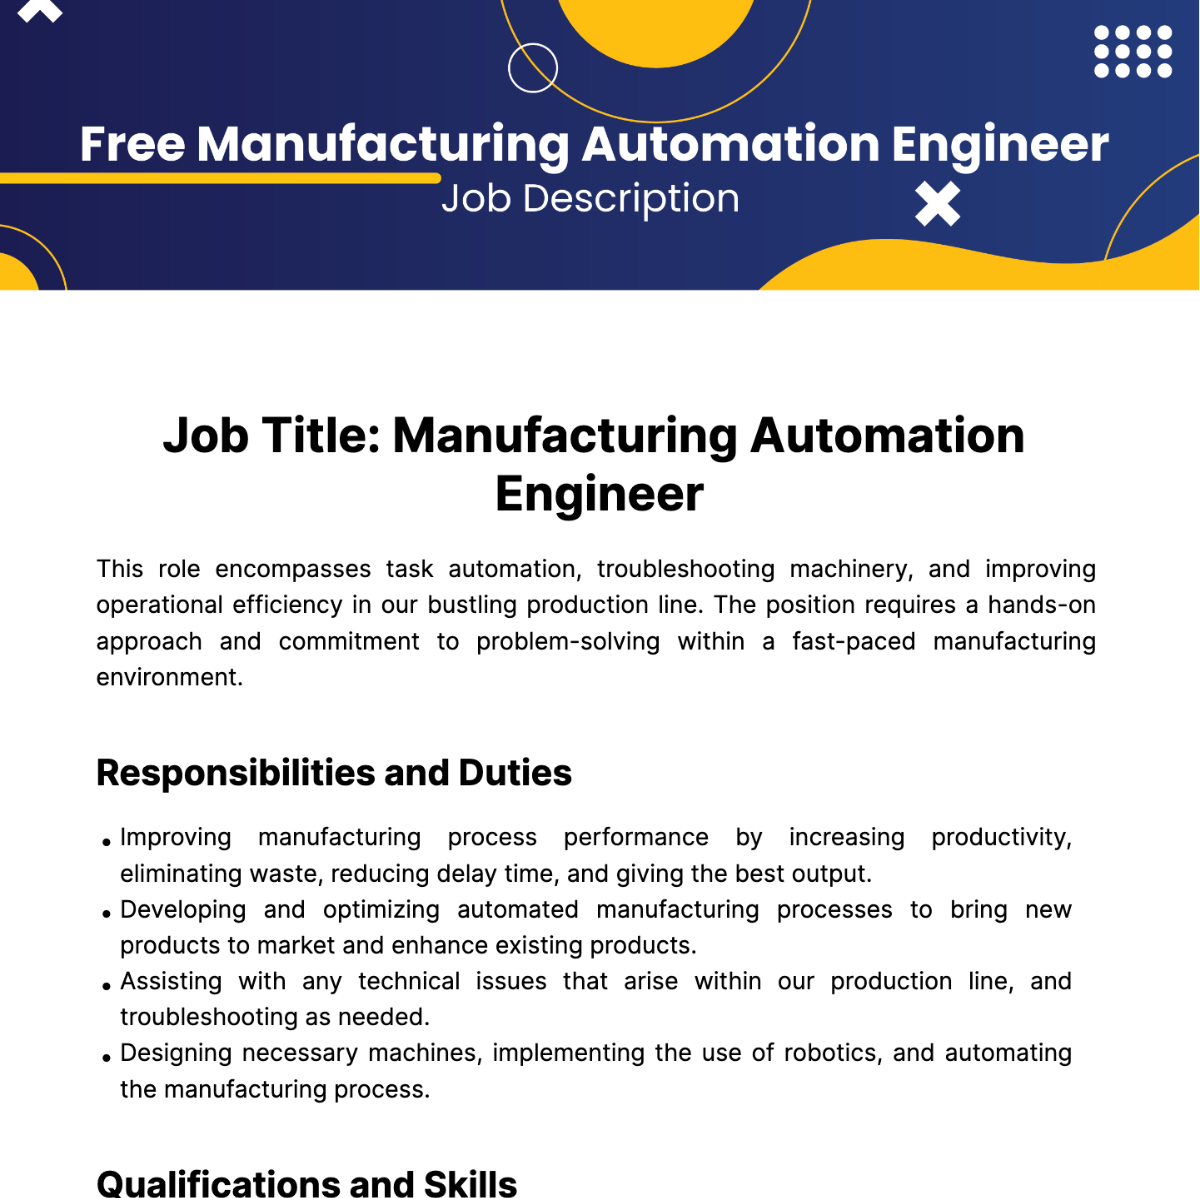 Free Manufacturing Automation Engineer Job Description Template